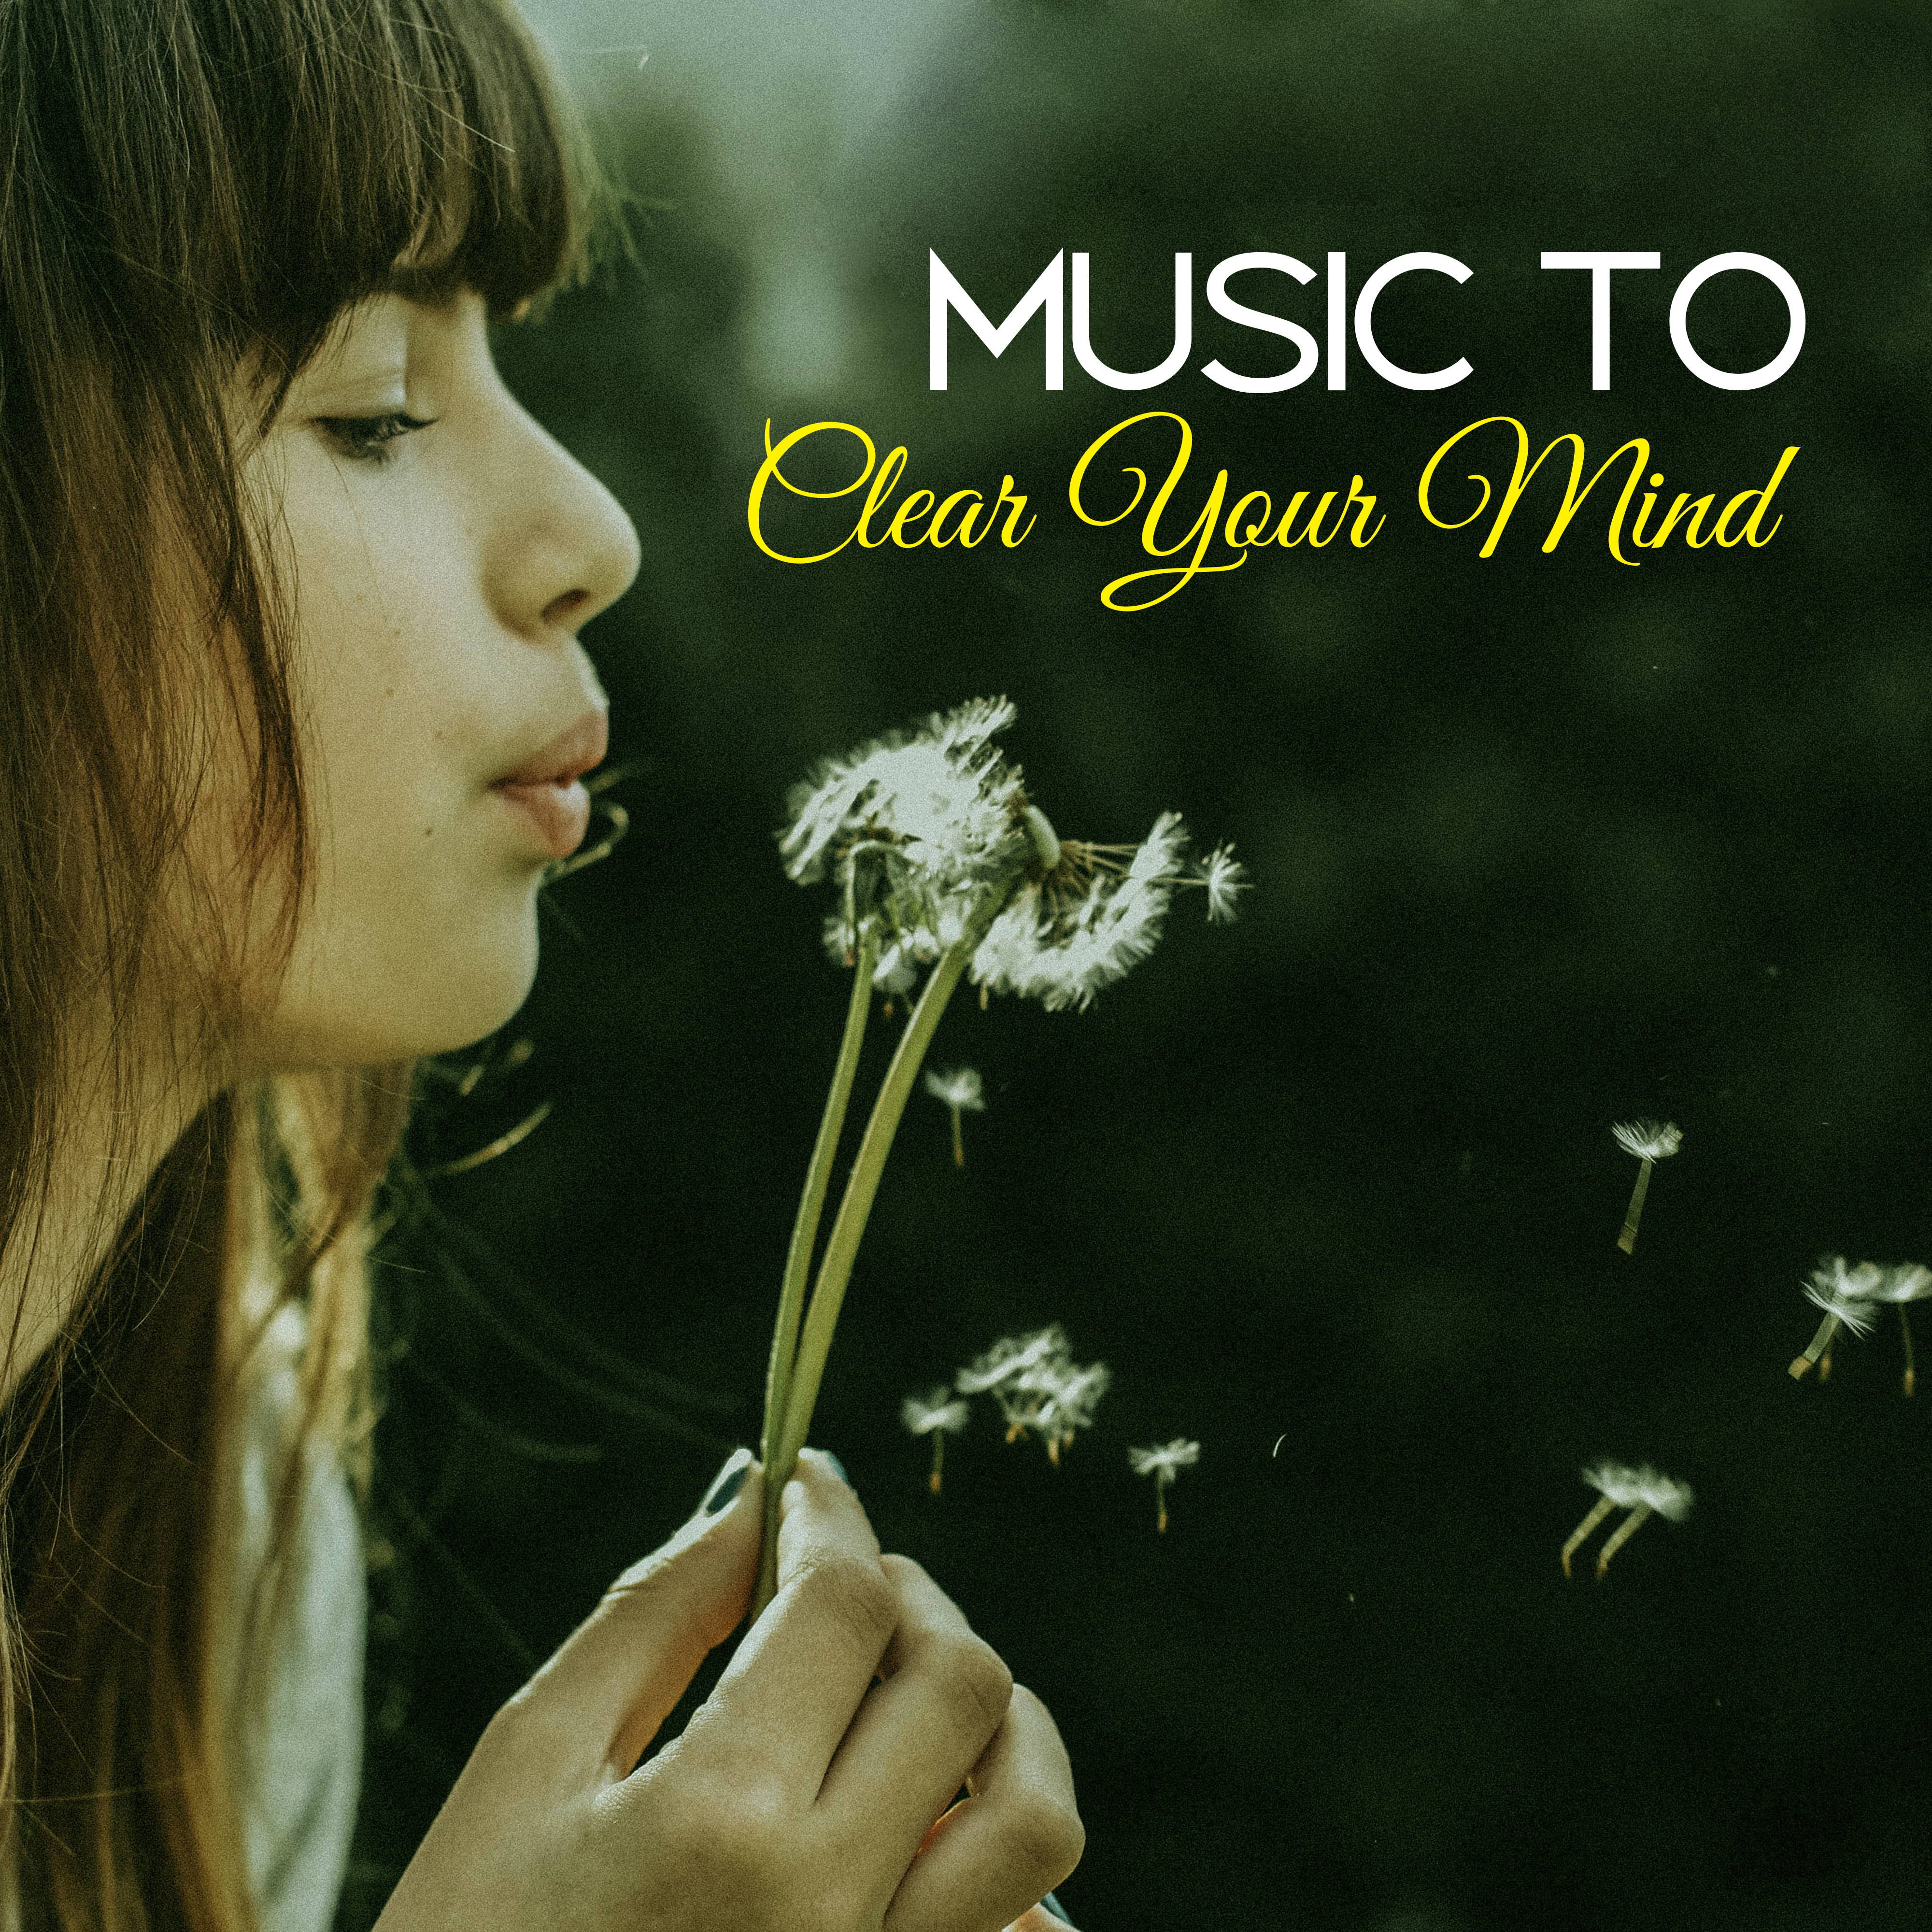 Music to Clear Your Mind  Easy Listening, Relaxation Sounds, Mind Calmness, Peaceful Melodies, New Age Music, Rest a Bit